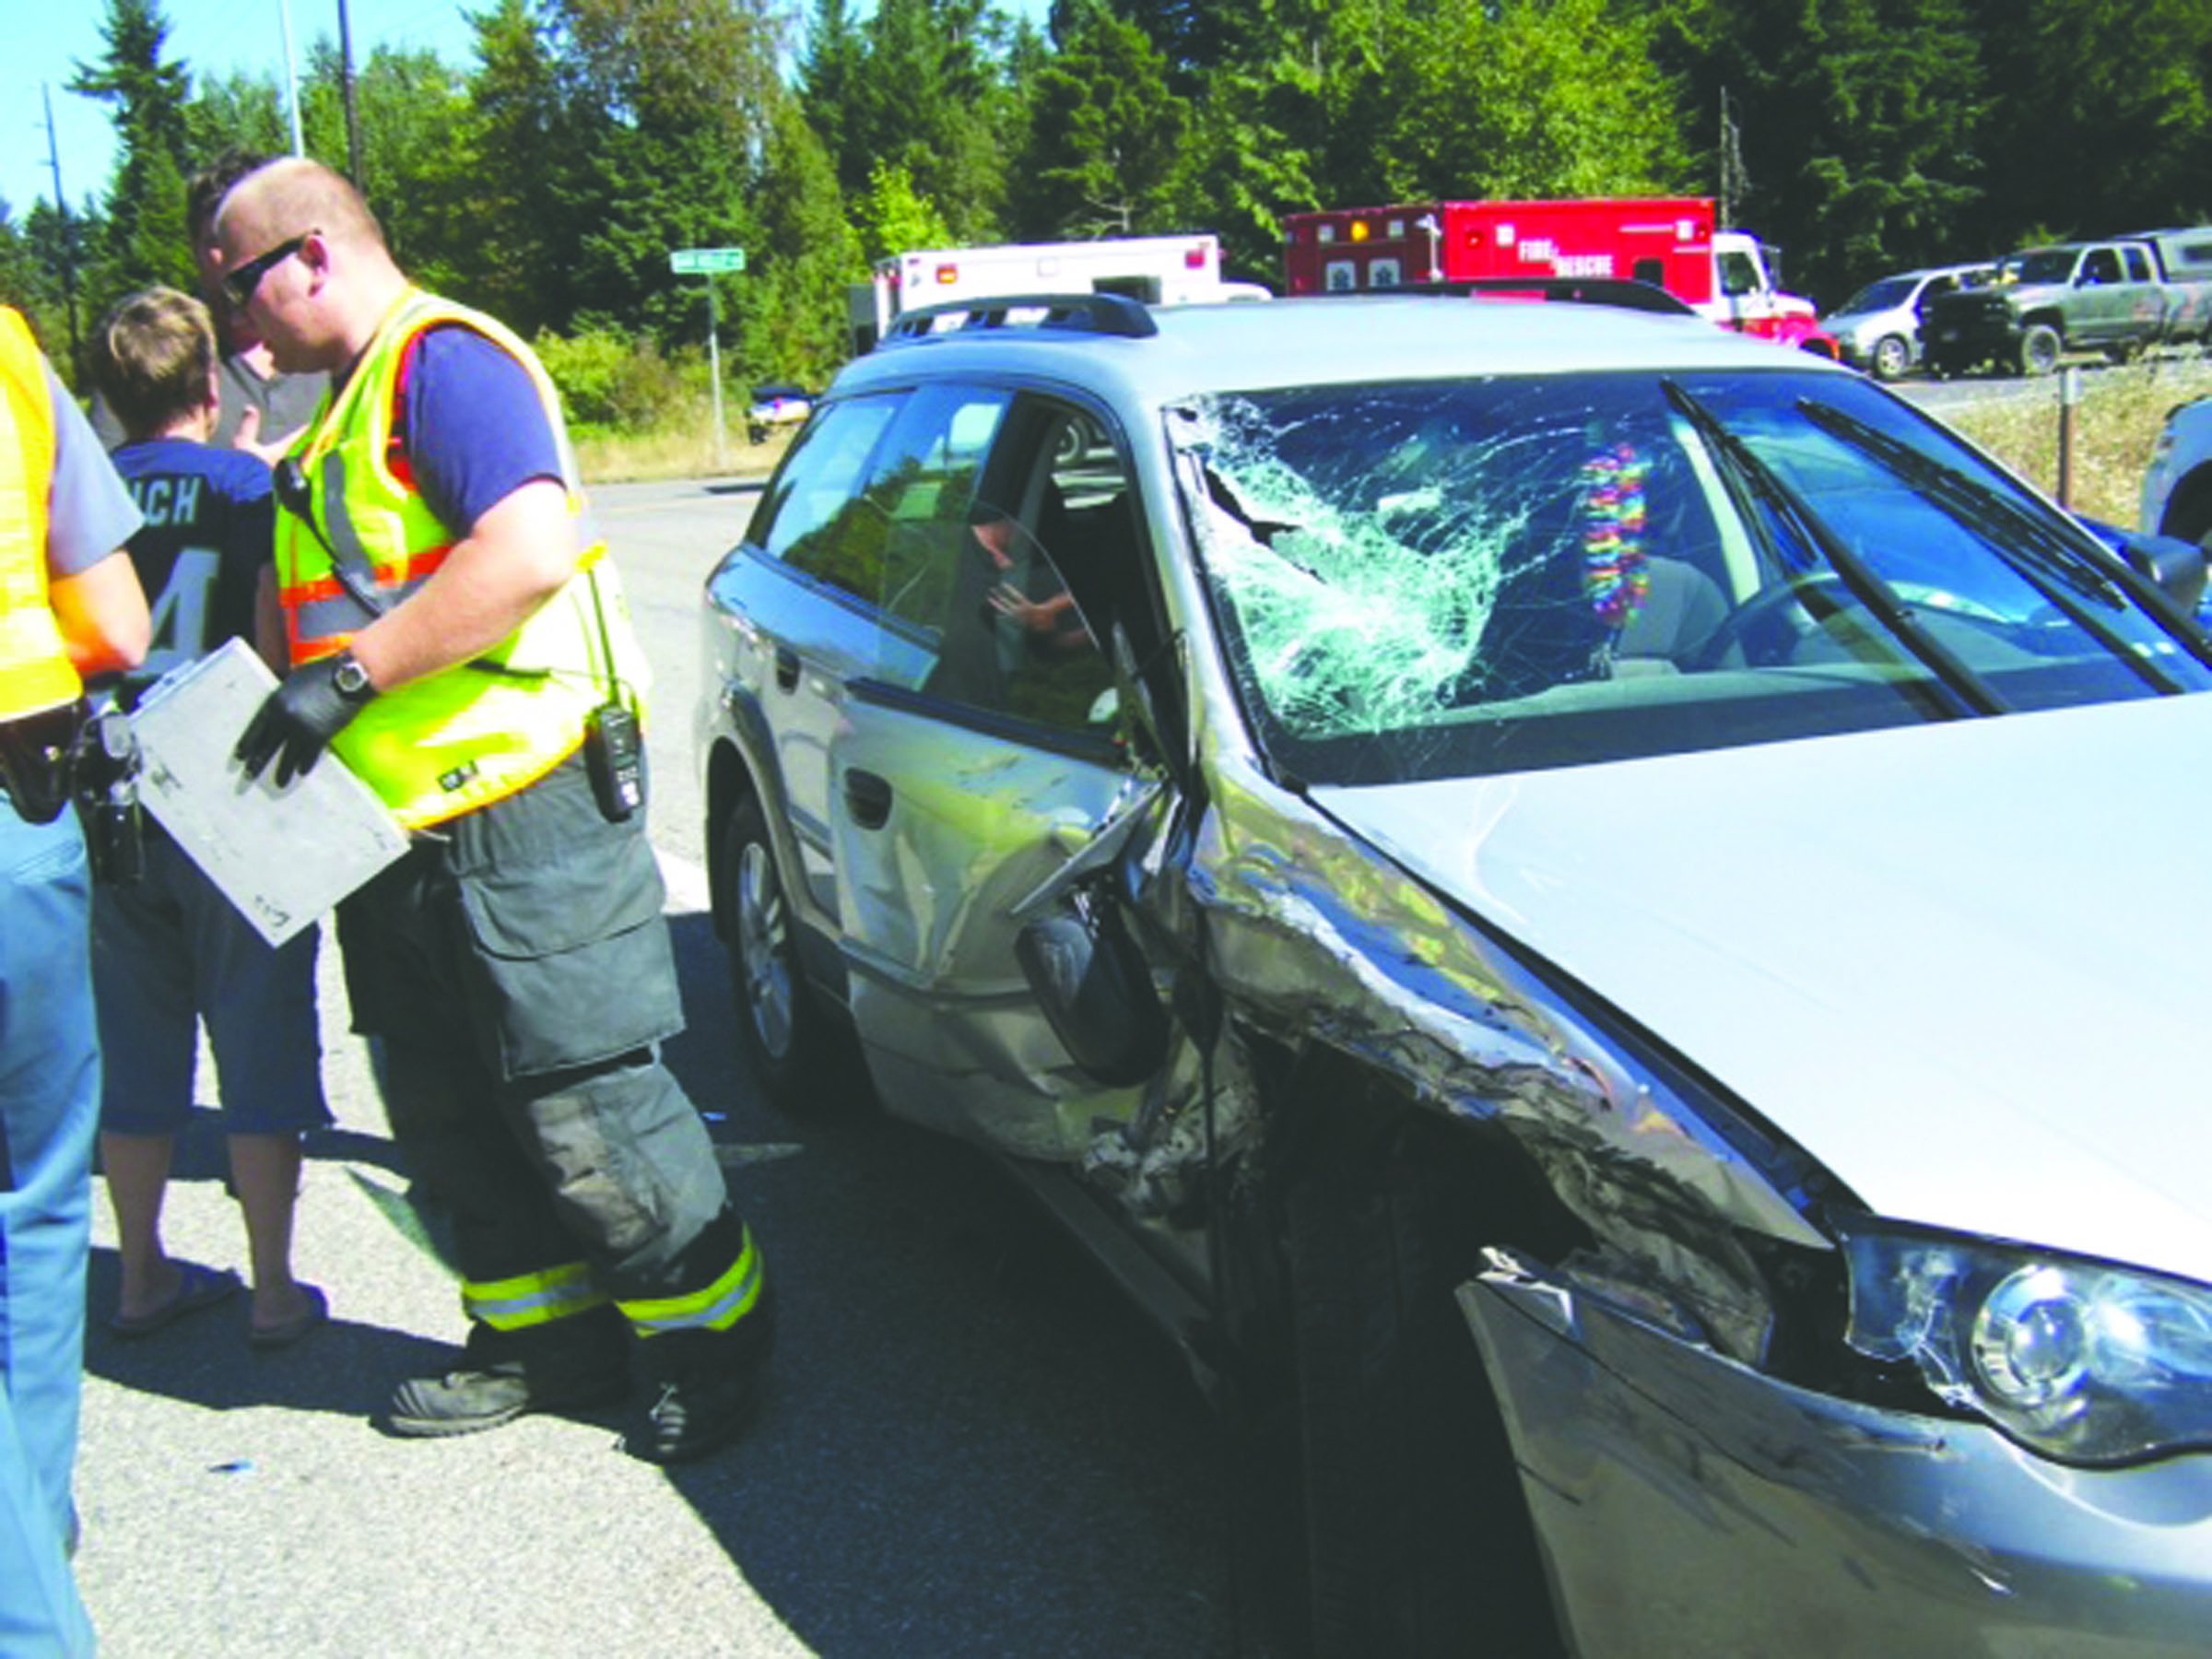 Emergency personnel from Clallam County Fire District discuss a two-vehicle crash that occurred Sunday afternoon at the intersection of Dan Kelly and Place roads with state Highway 112. Drivers of both vehicles were treated and released at the scene. Clallam County Fire District No. 2